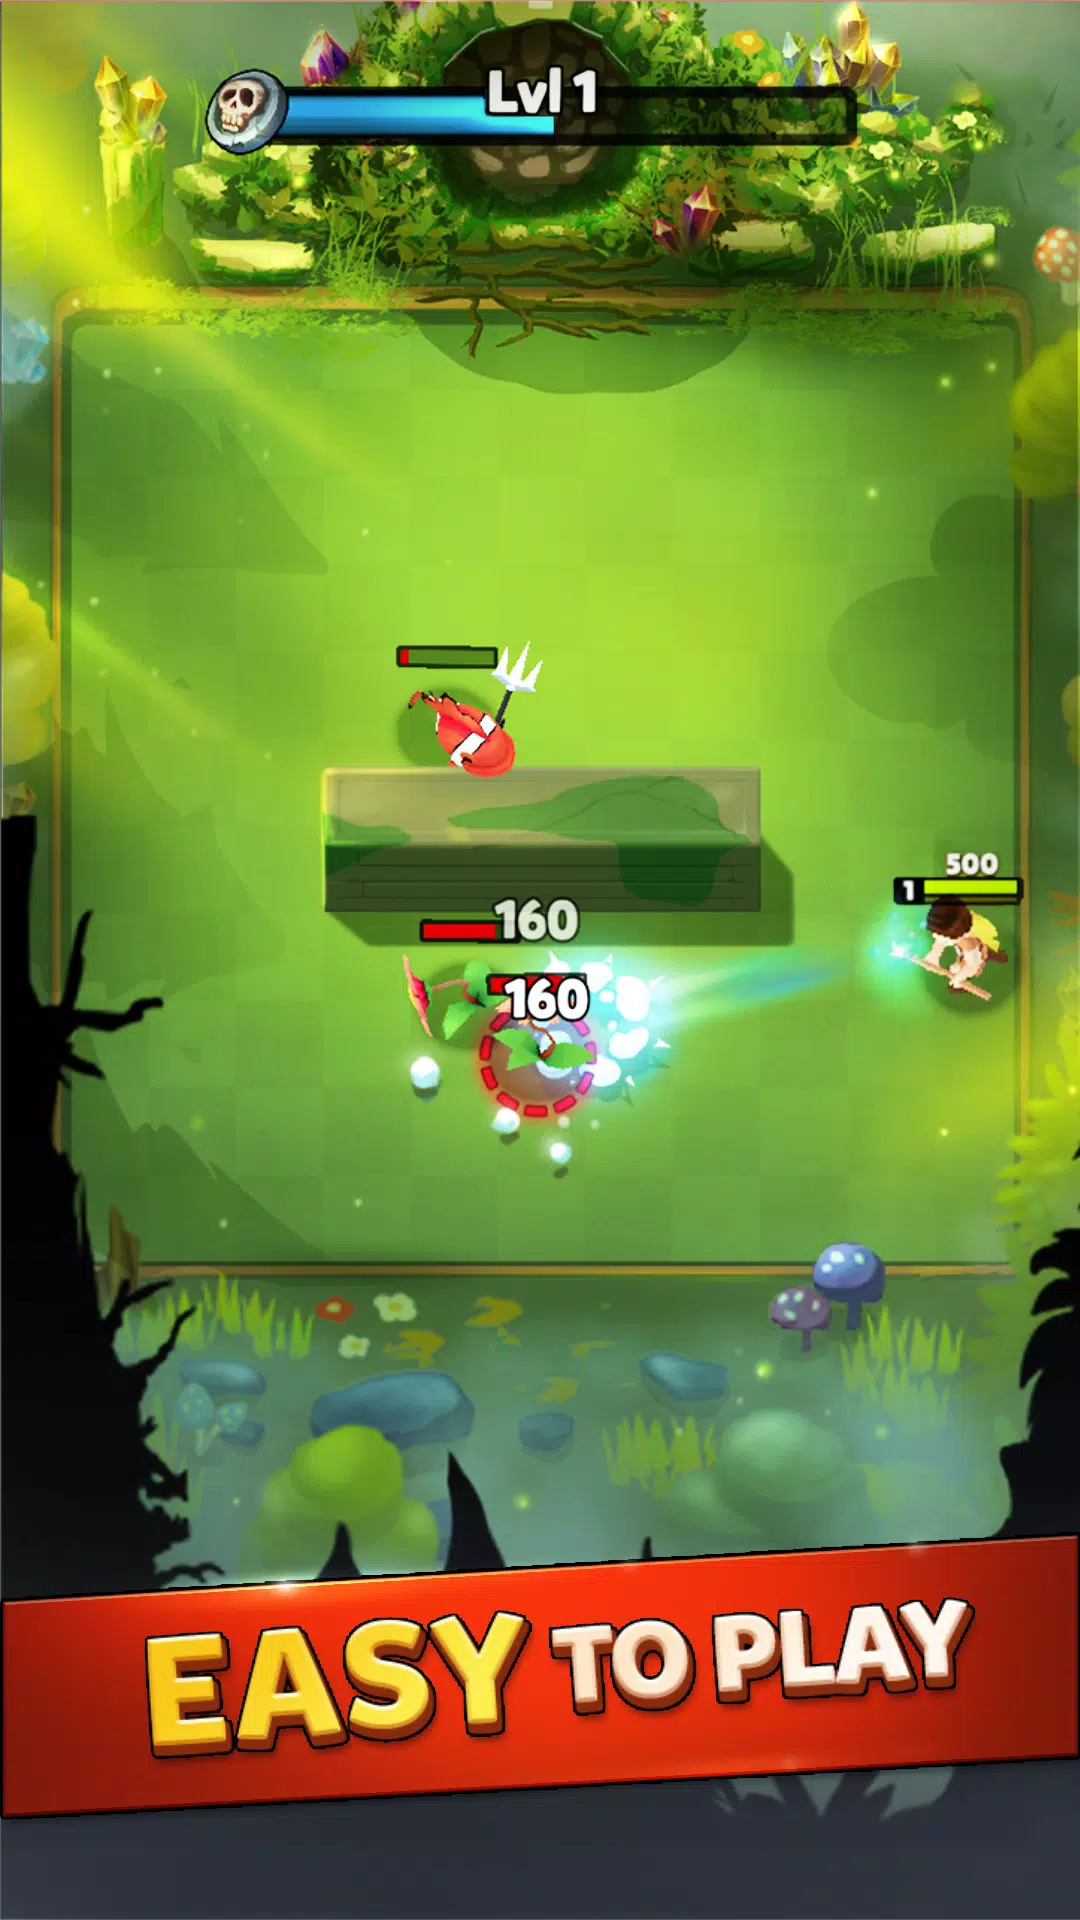 Mage Legends: Wizard Archer Apk Download for Android- Latest version  1.6.13- com.noxgames.mage.hero